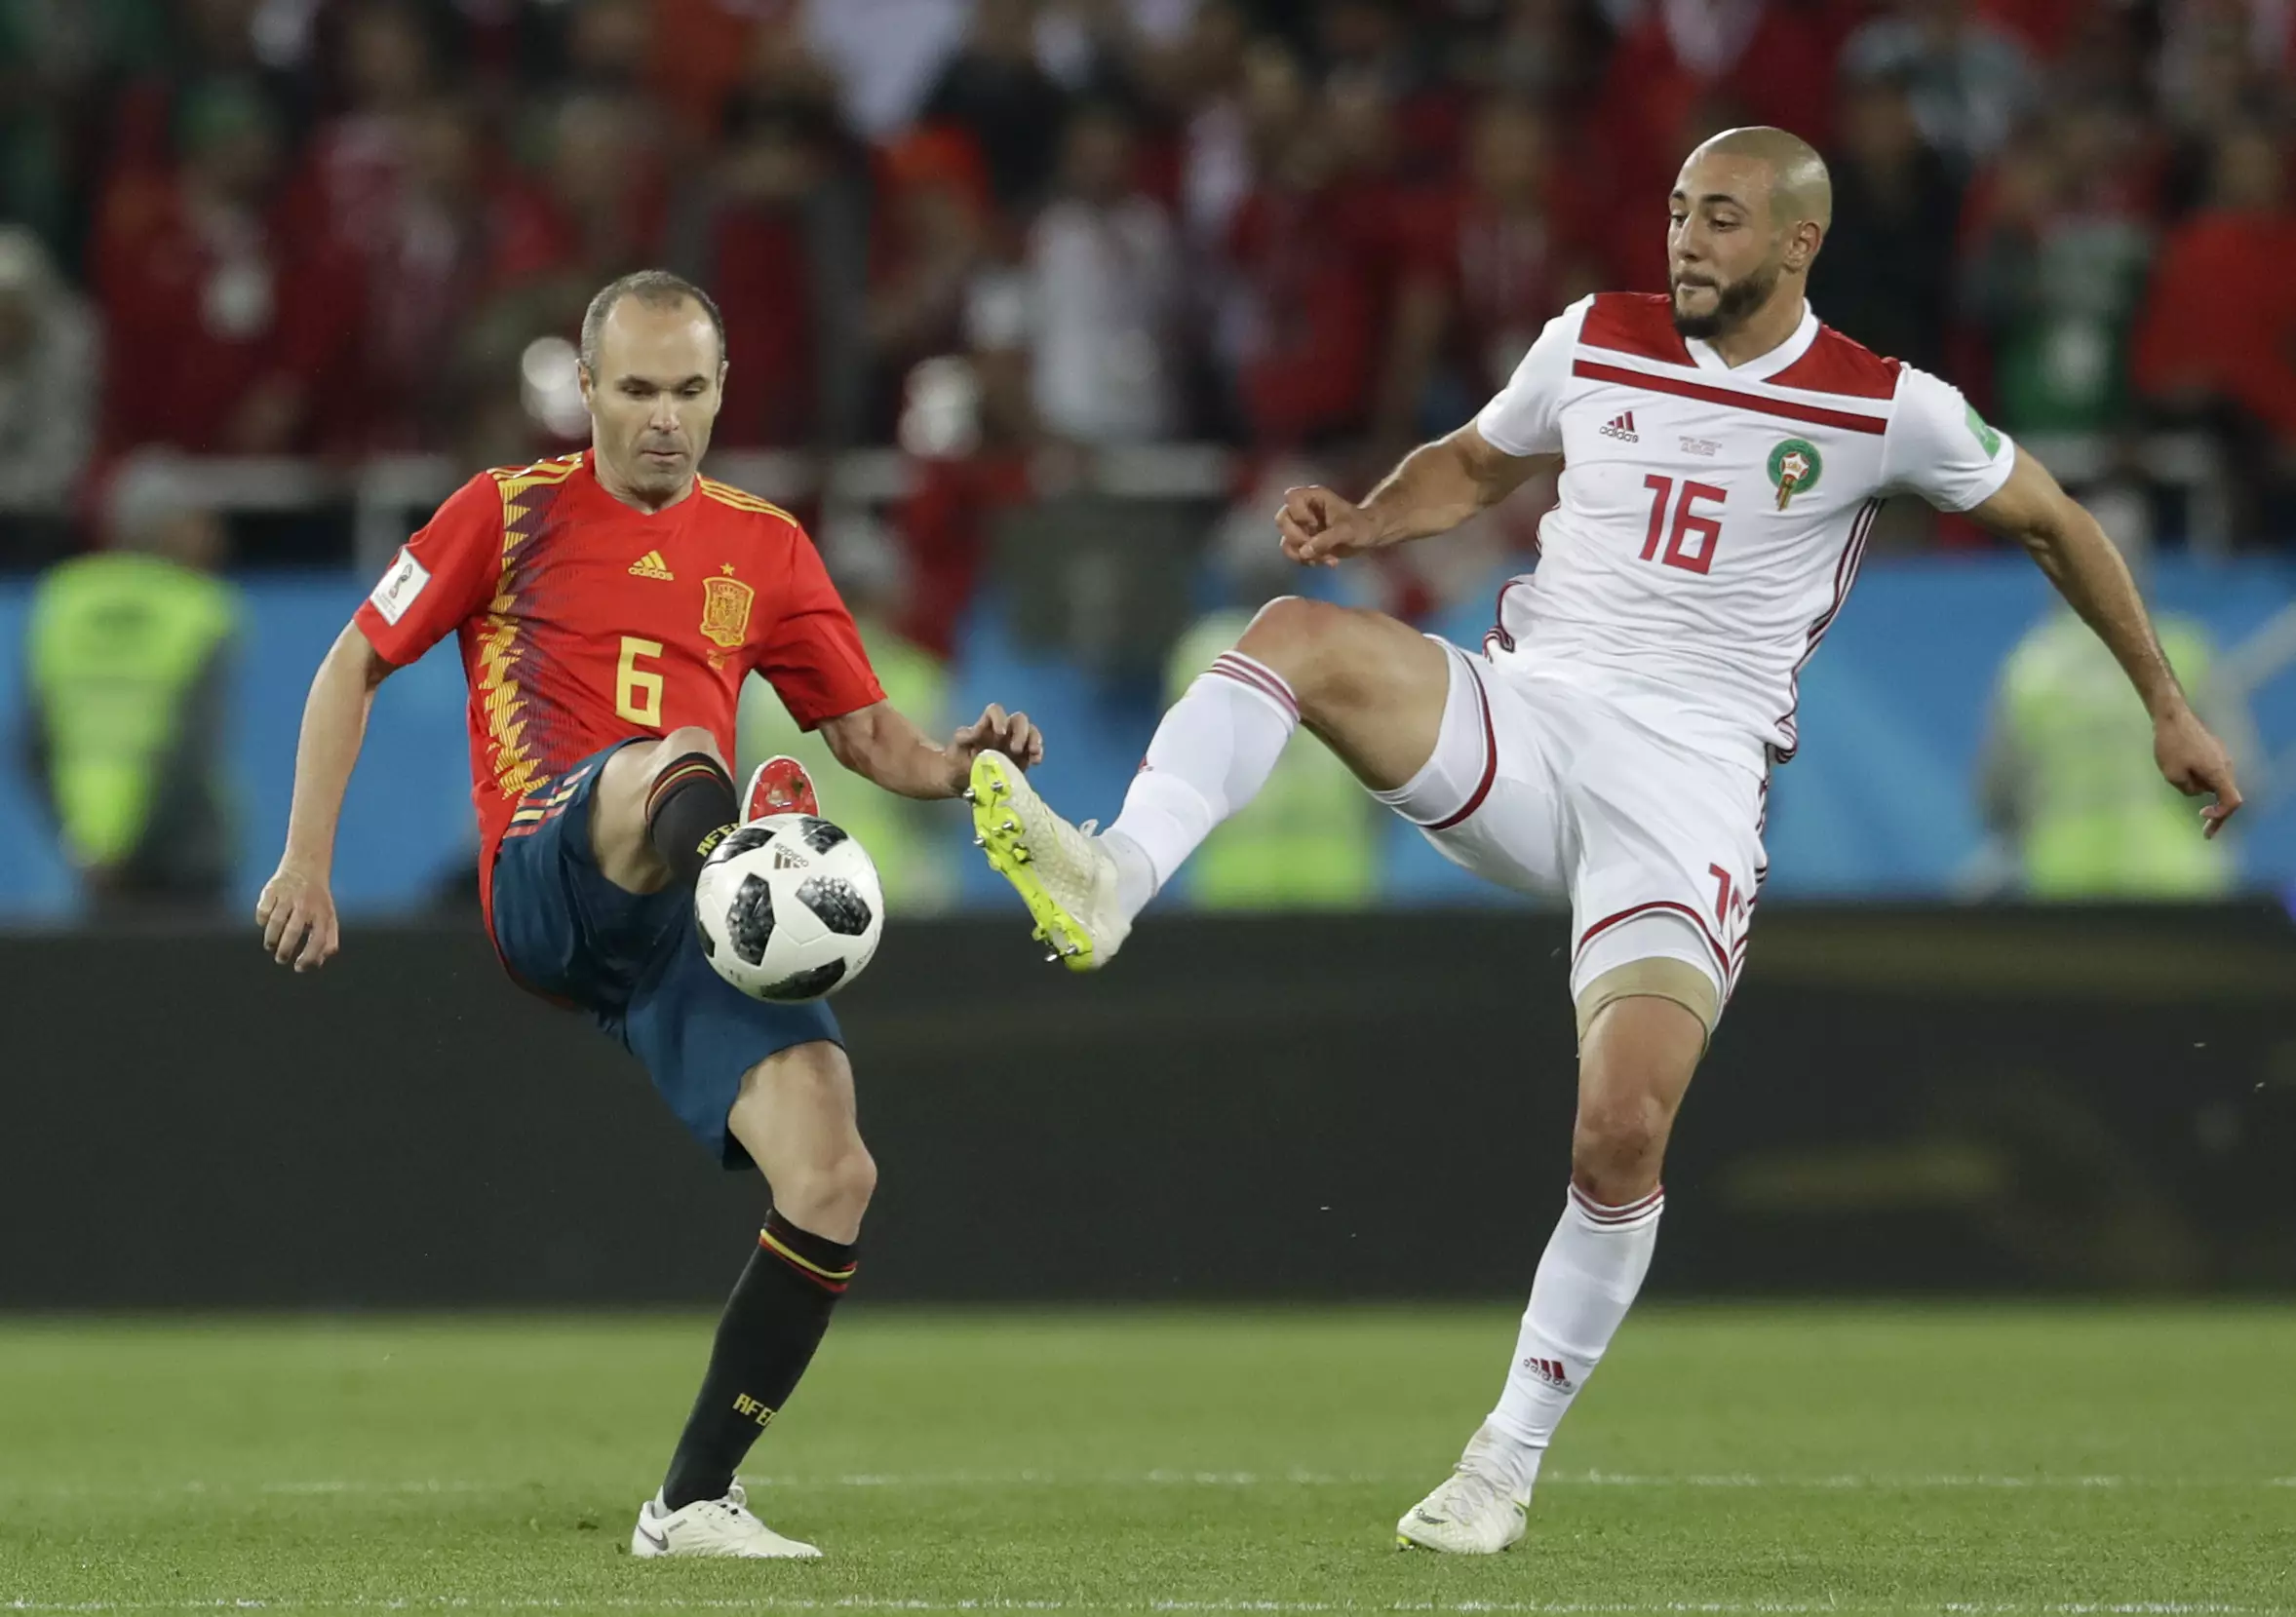 Amrabat challenging for the ball. Image: PA